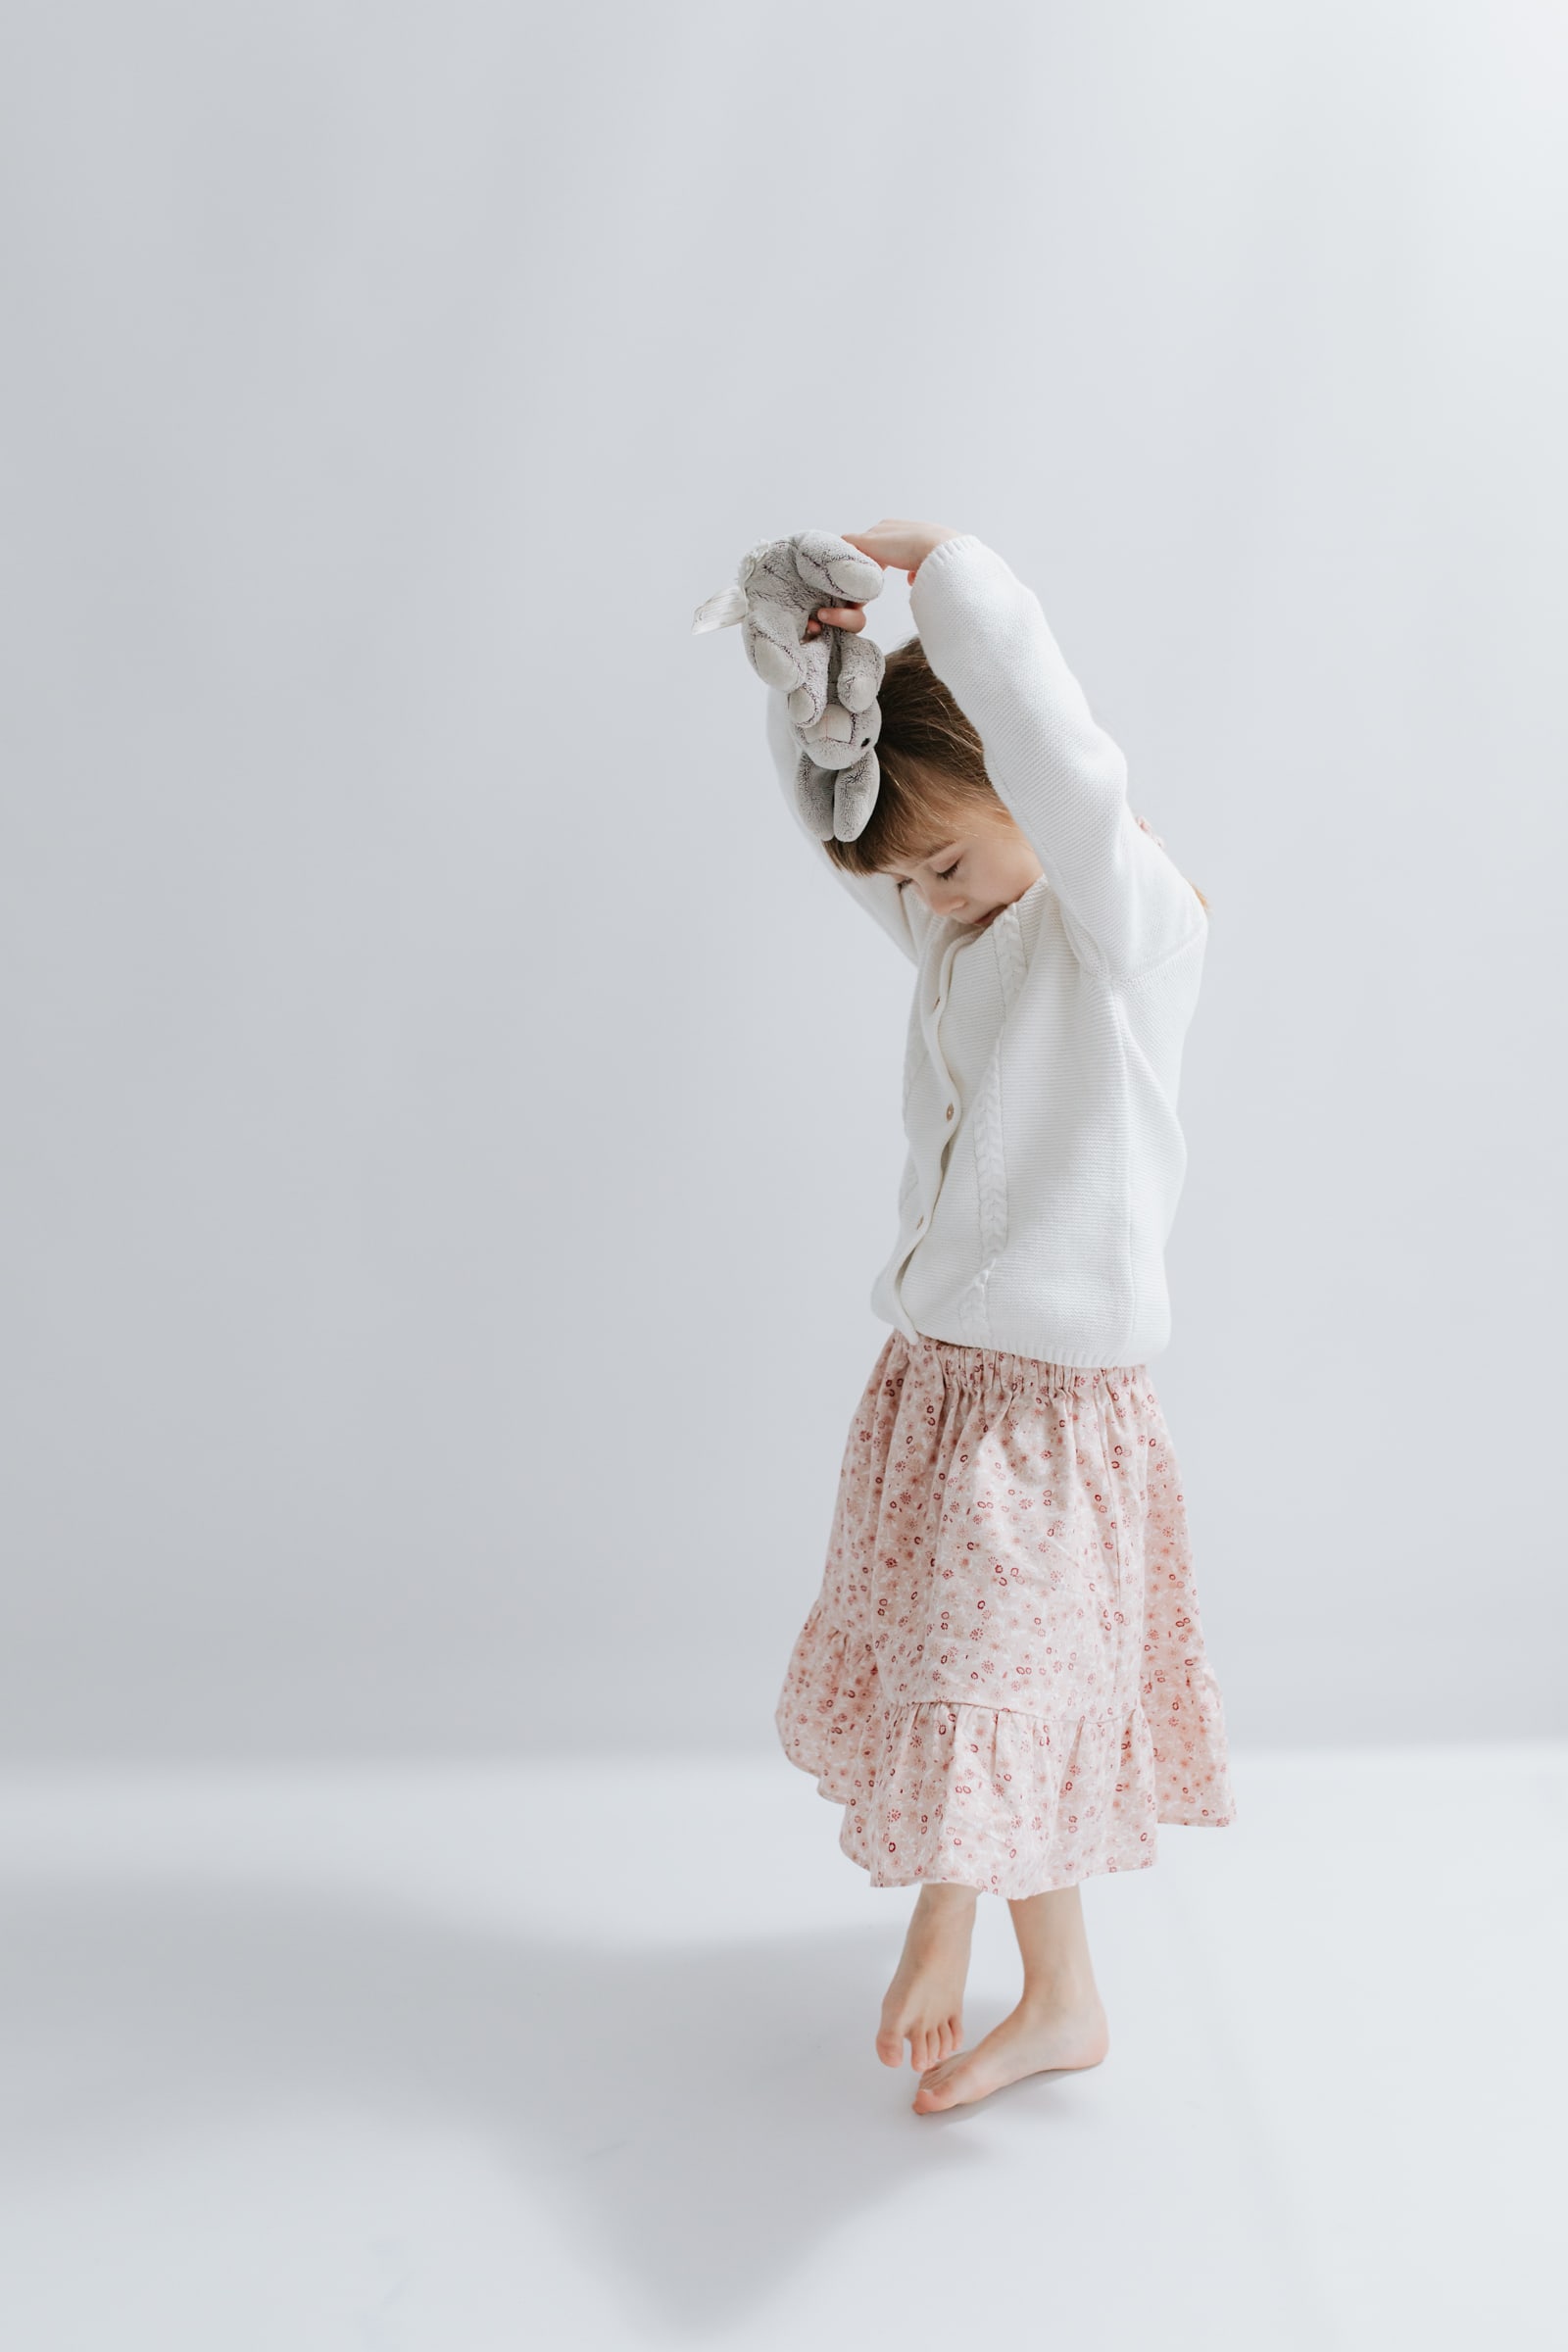 little girl dancing holding a toy bunny at her kent family photoshoot in bexley